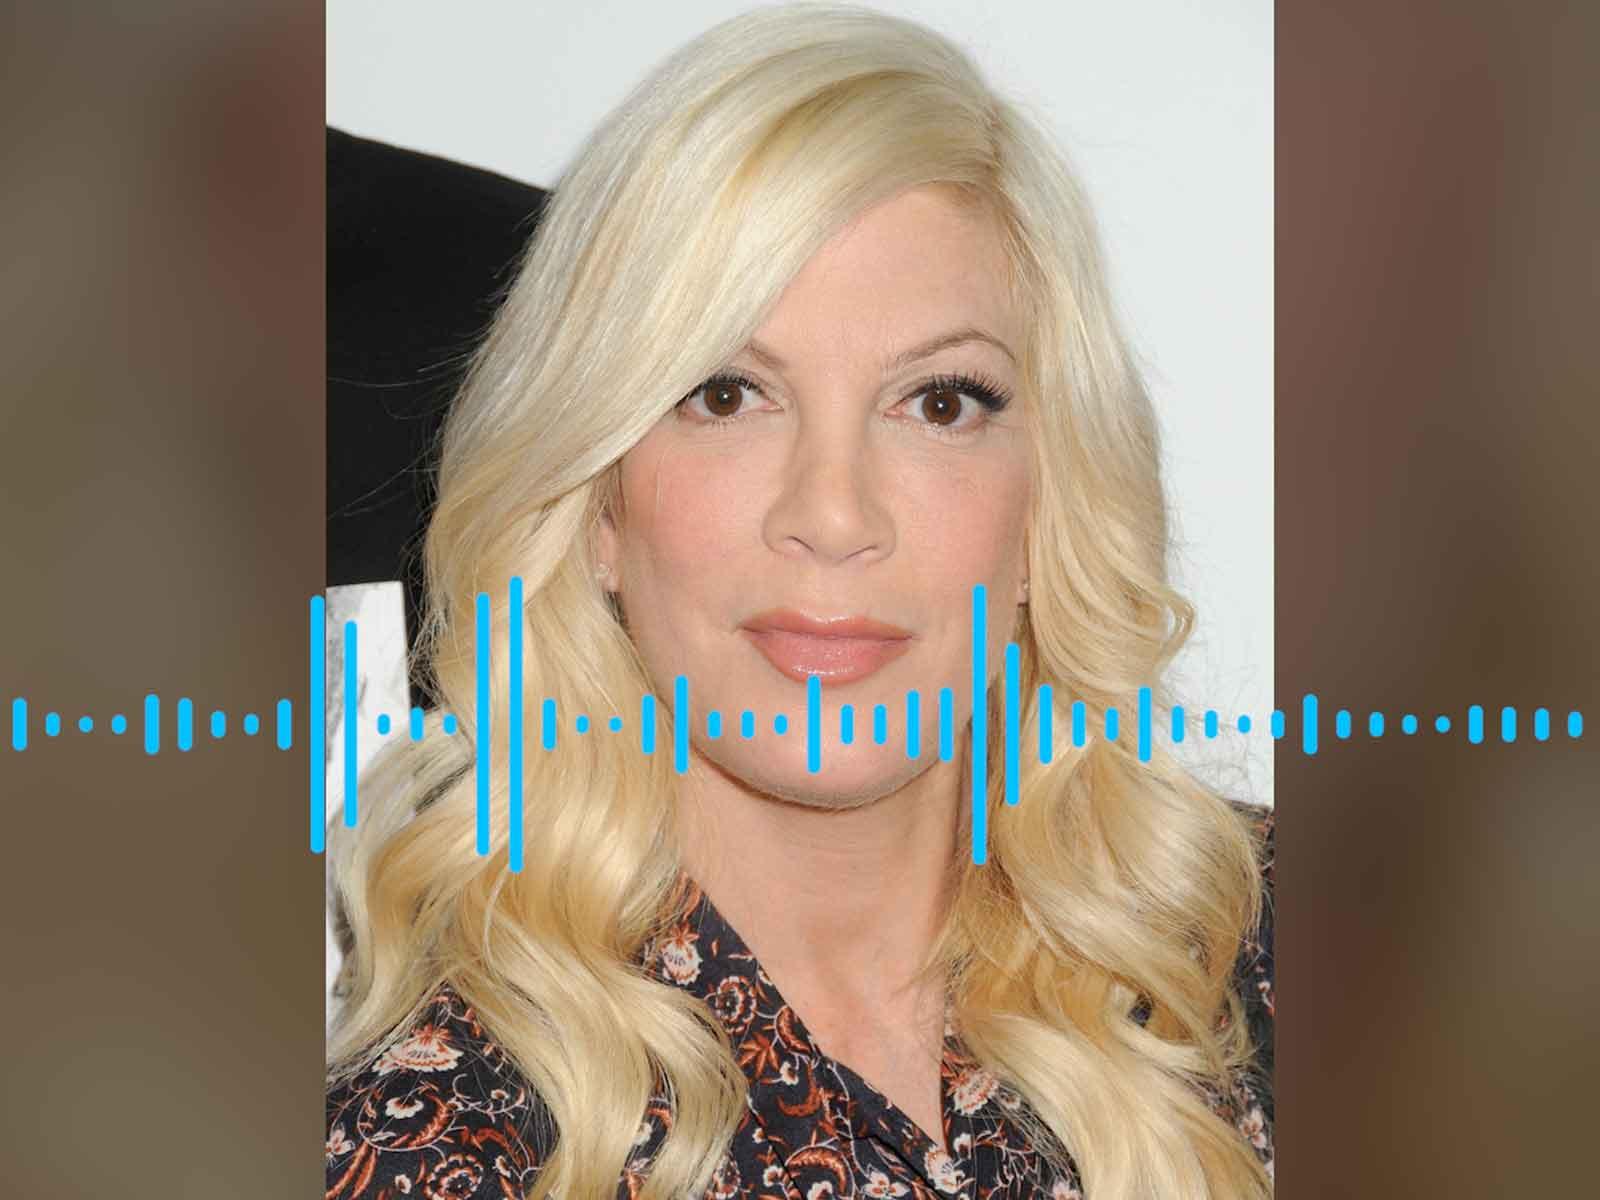 Tori Spelling Gets Early Morning Visit from LAPD Over Possible ‘Mental Illness’